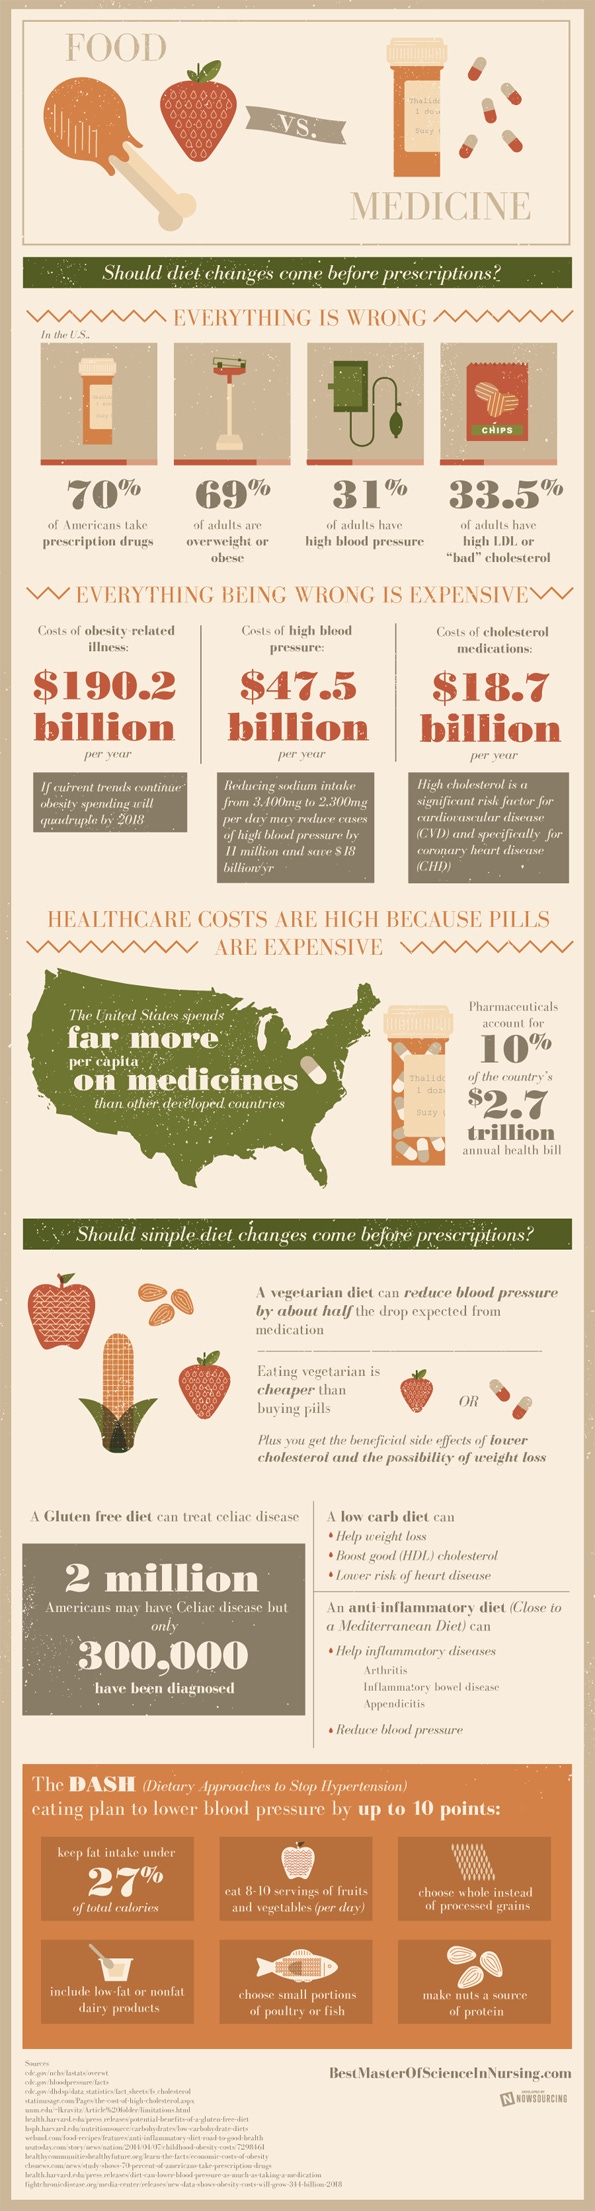 Why aren't we medicating with food rather than prescription pills?